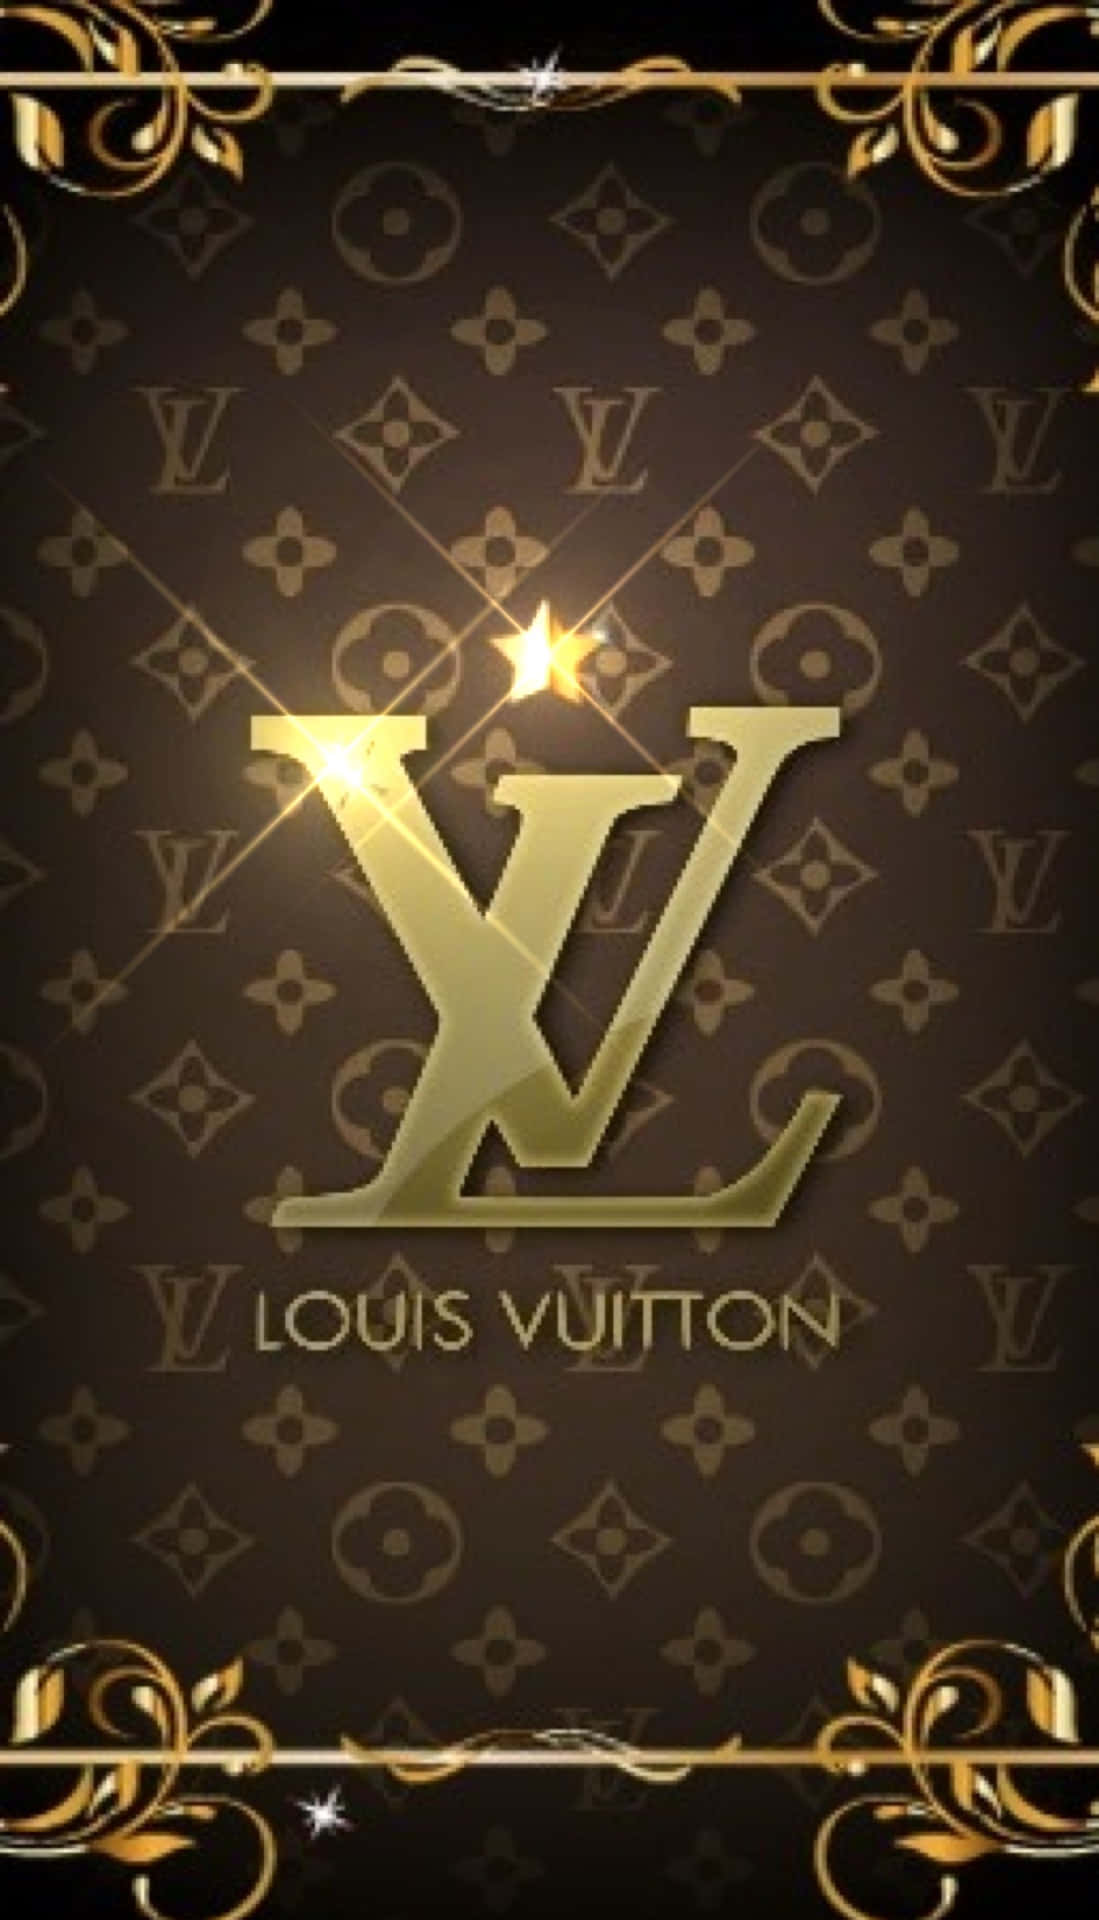 Get The Latest And Greatest In Fashion And Technology With The Louis Vuitton Iphone. Background